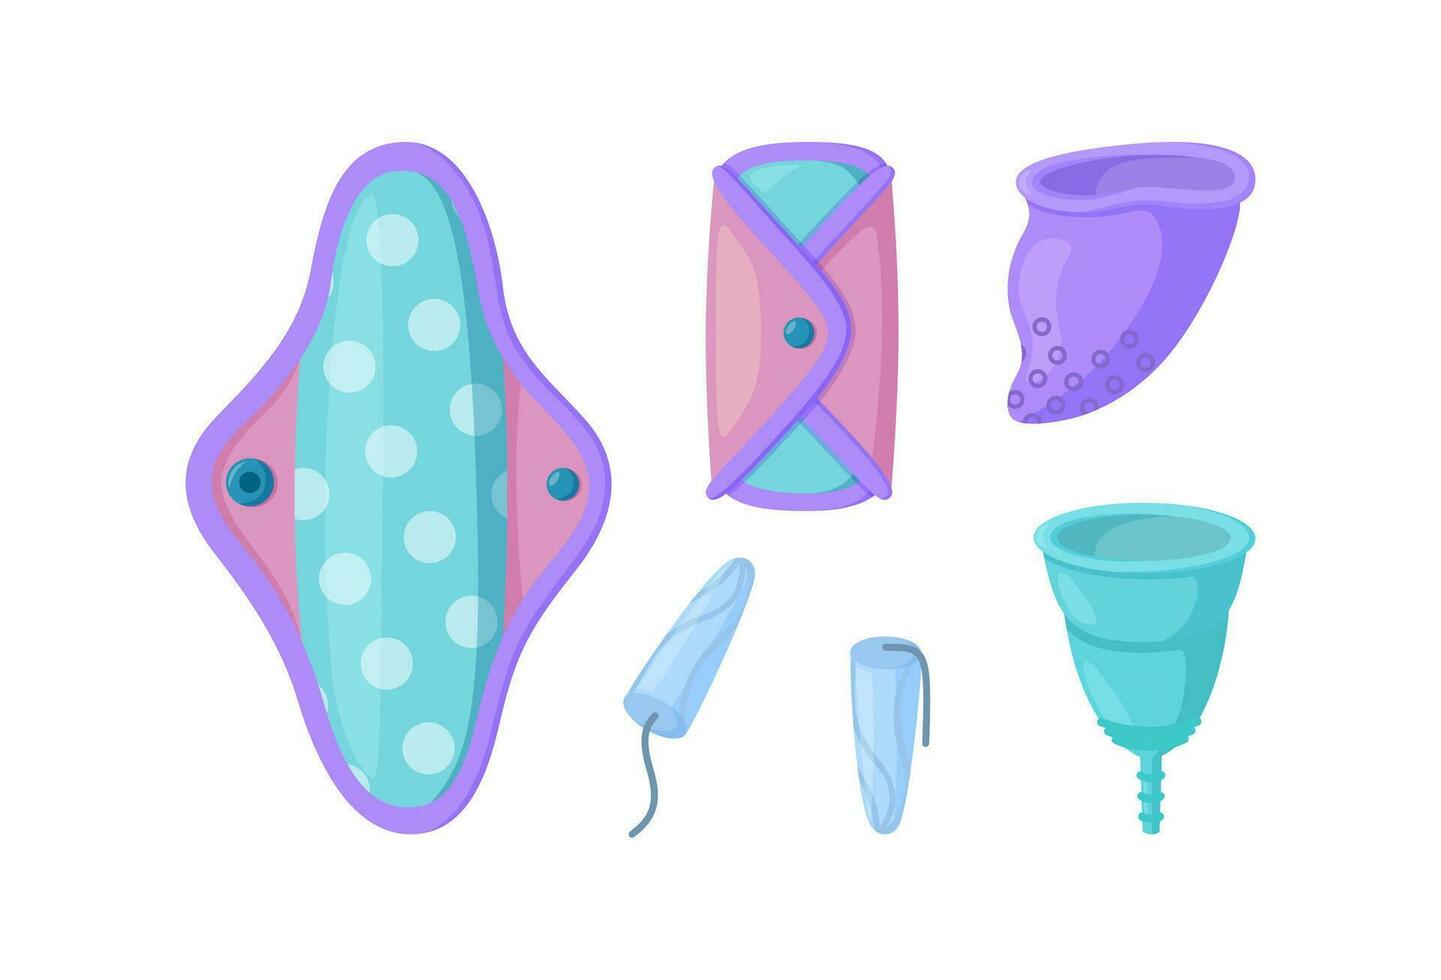 Reusable menstrual pads, cups and tampon in white background. Sanitary items for women. Vector illustration